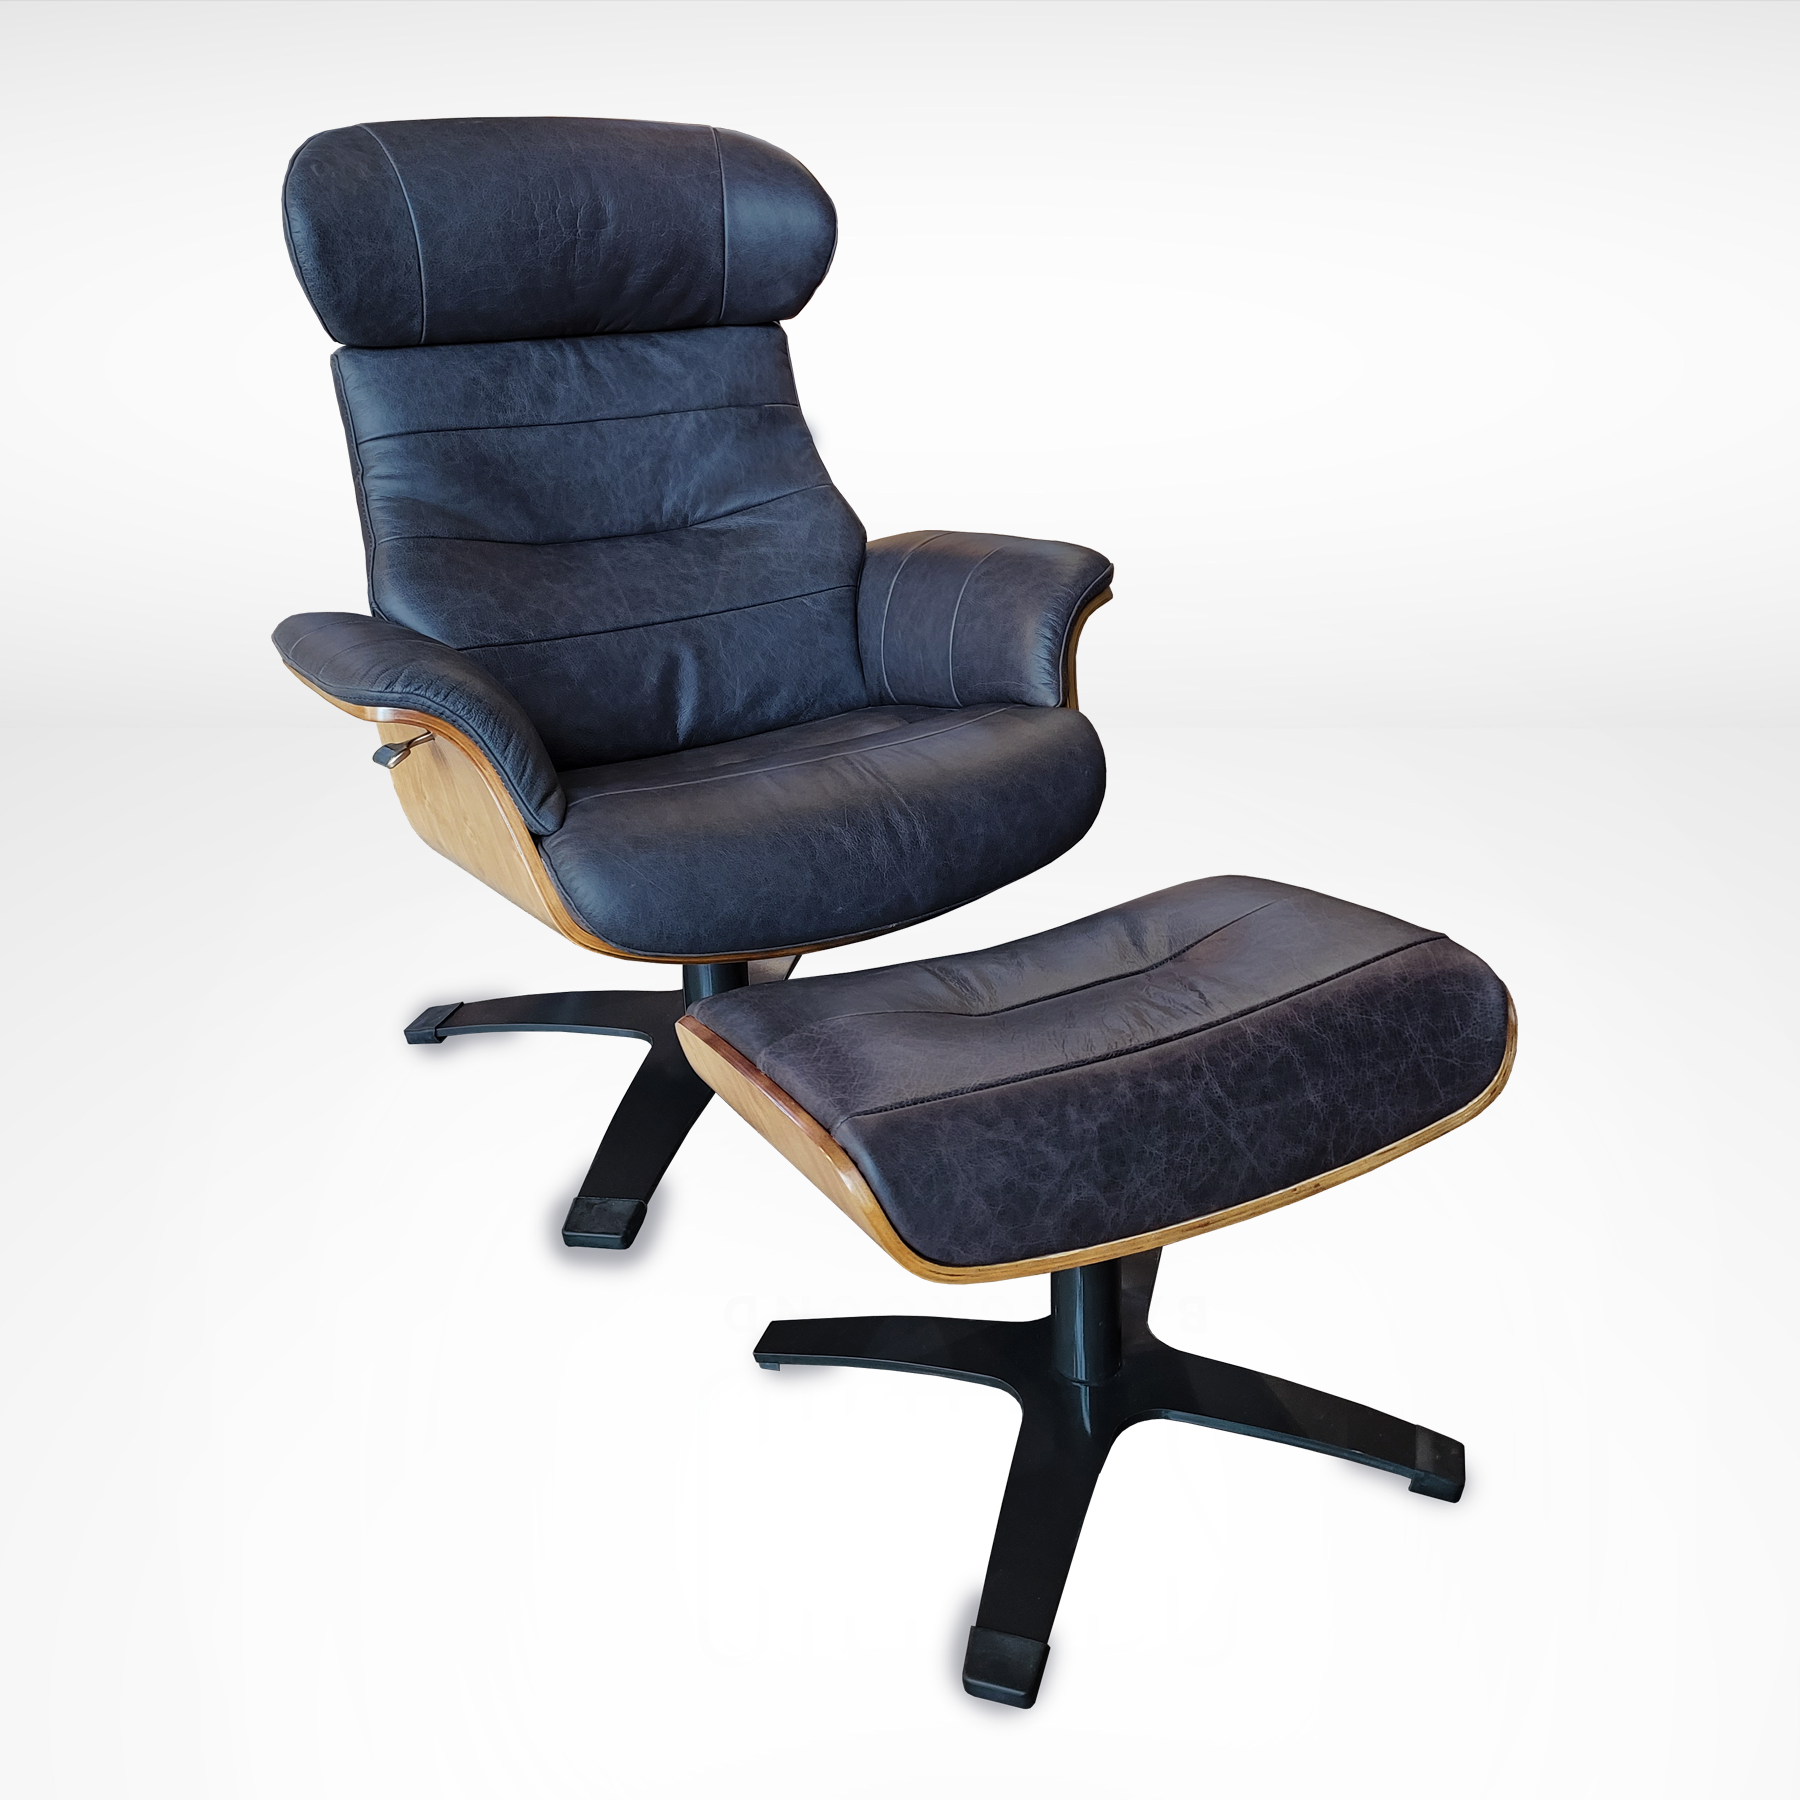 Lori armchair with foot rest